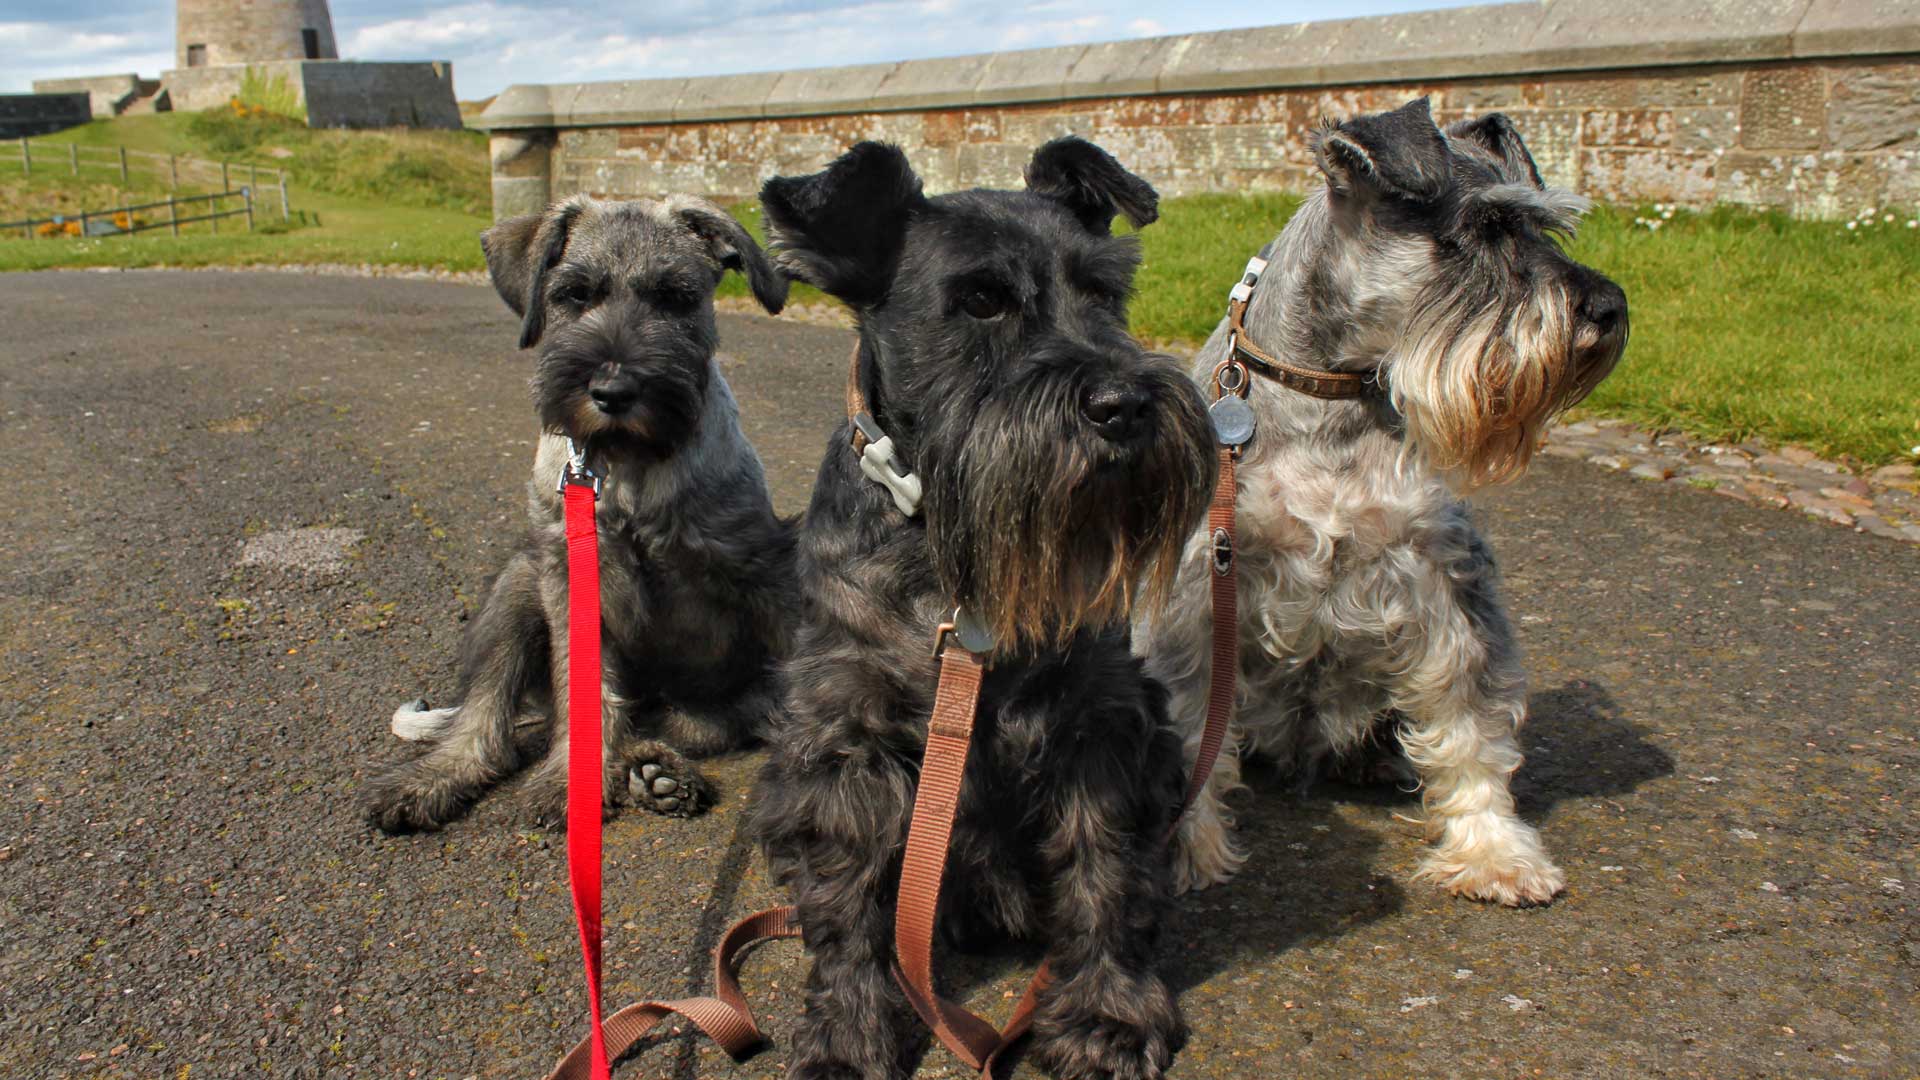 Dogs are welcome at Bamburgh Castle